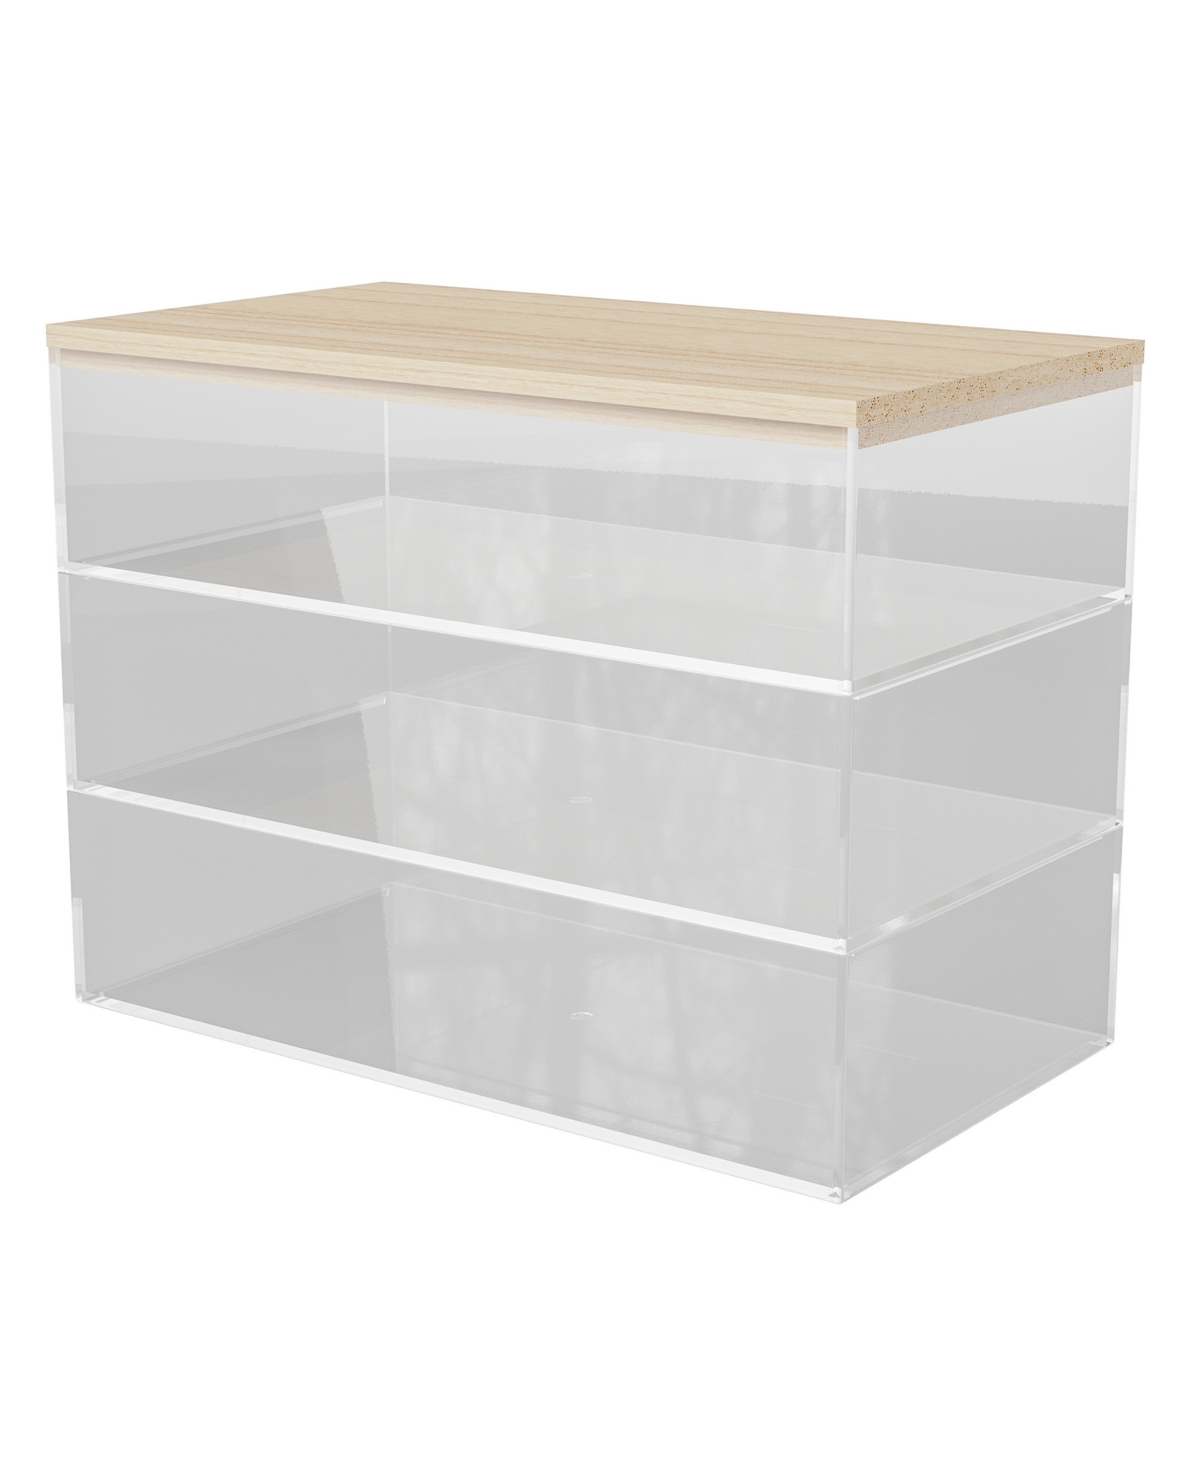 Martha Stewart Brody Plastic Storage Organizer Bins With Paulownia Wood Lid For Home Office Or Kitchen, 3 Pack Medi In Clear,light Natural